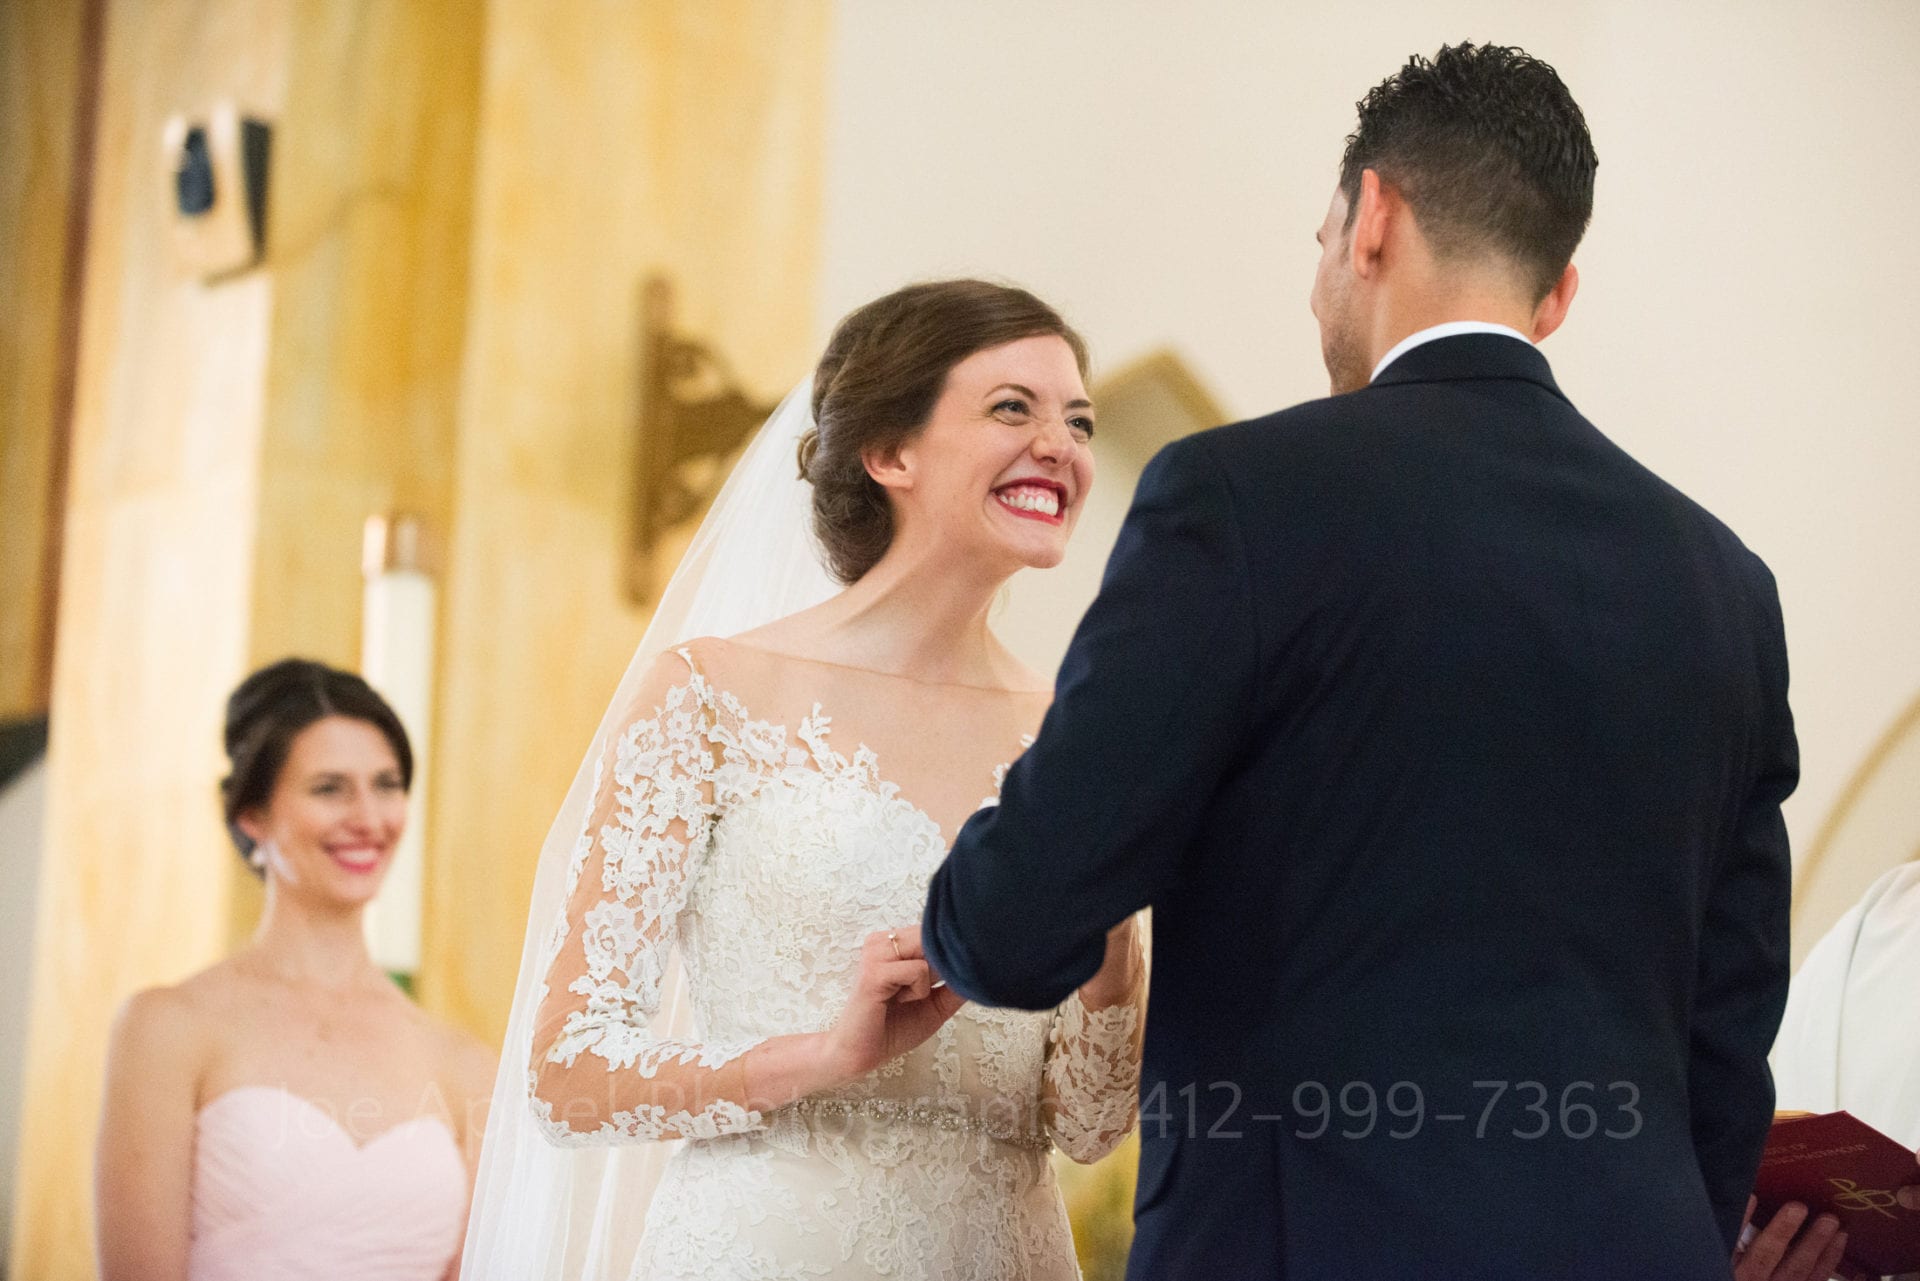 Bride looks at her groom with a huge grin as they exchange vows on the altar of a church.